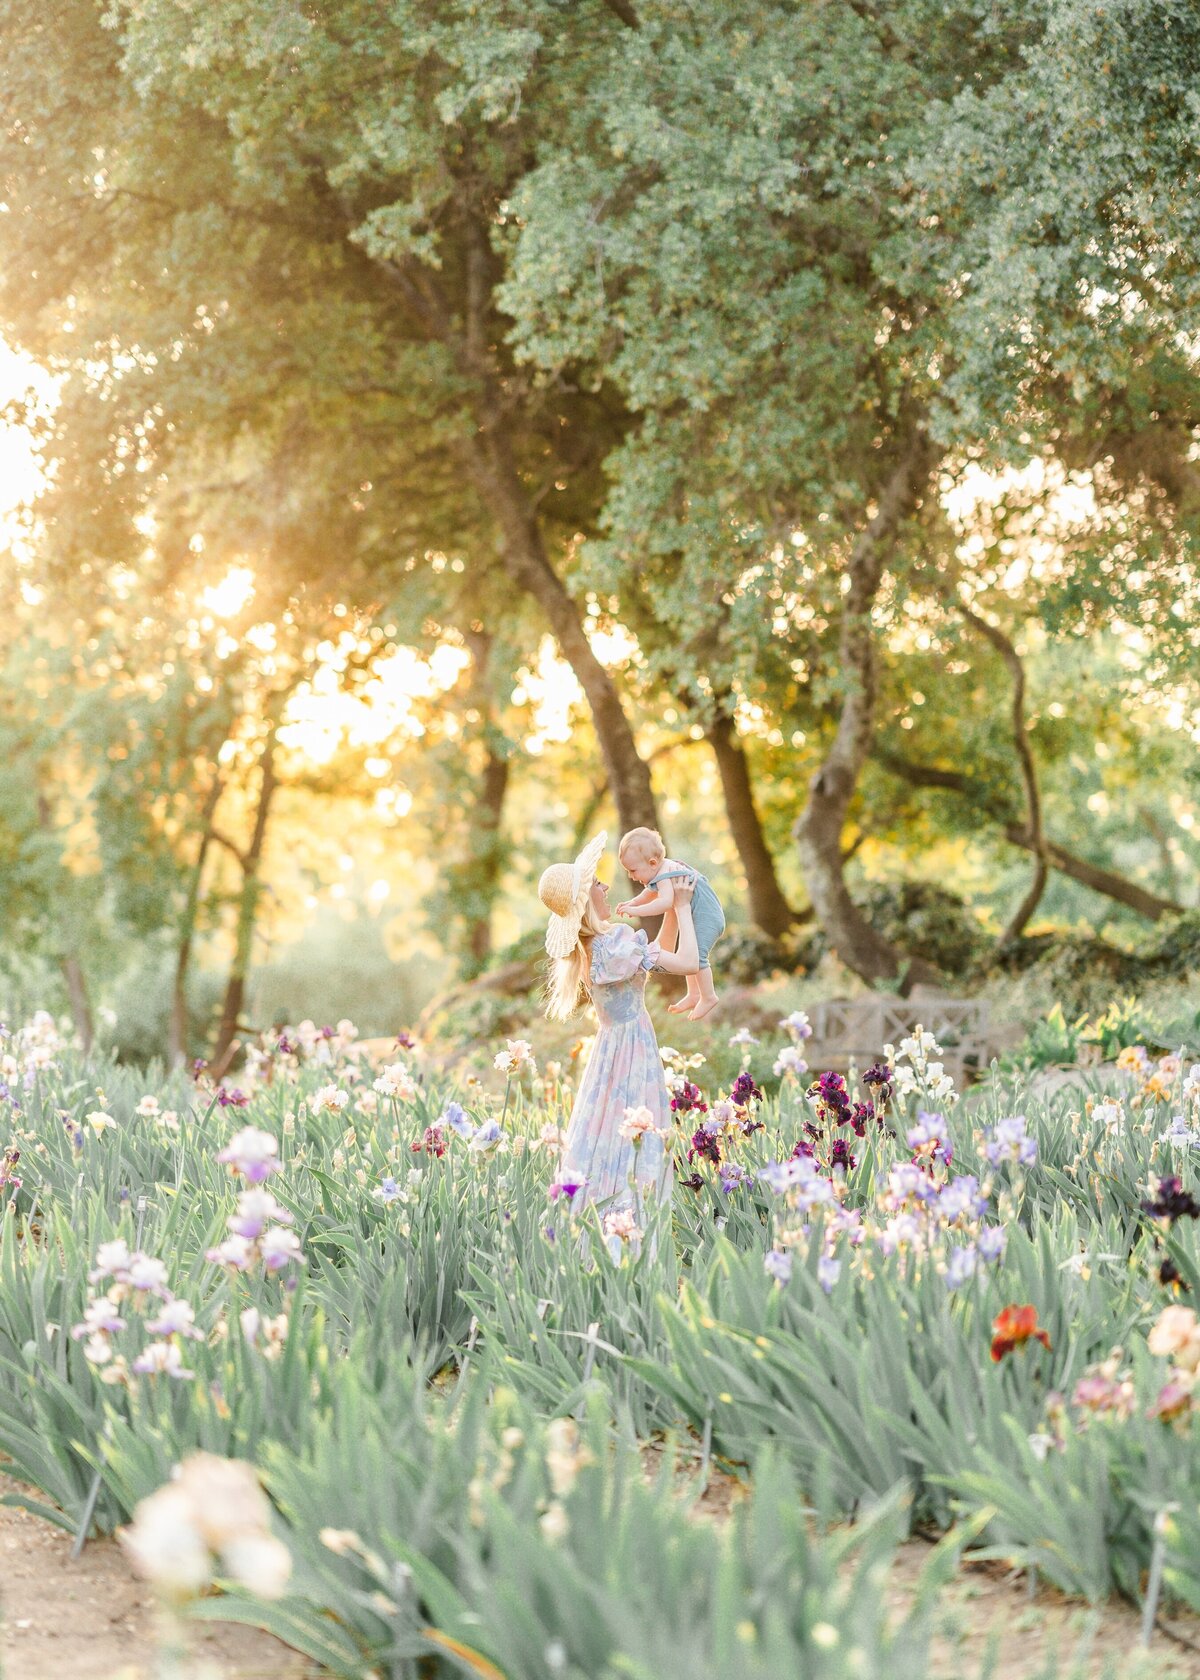 A family session photographed by Bay Area Photographer, Light Livin Photography shows a woman swinging her baby in a field of iris flowers.